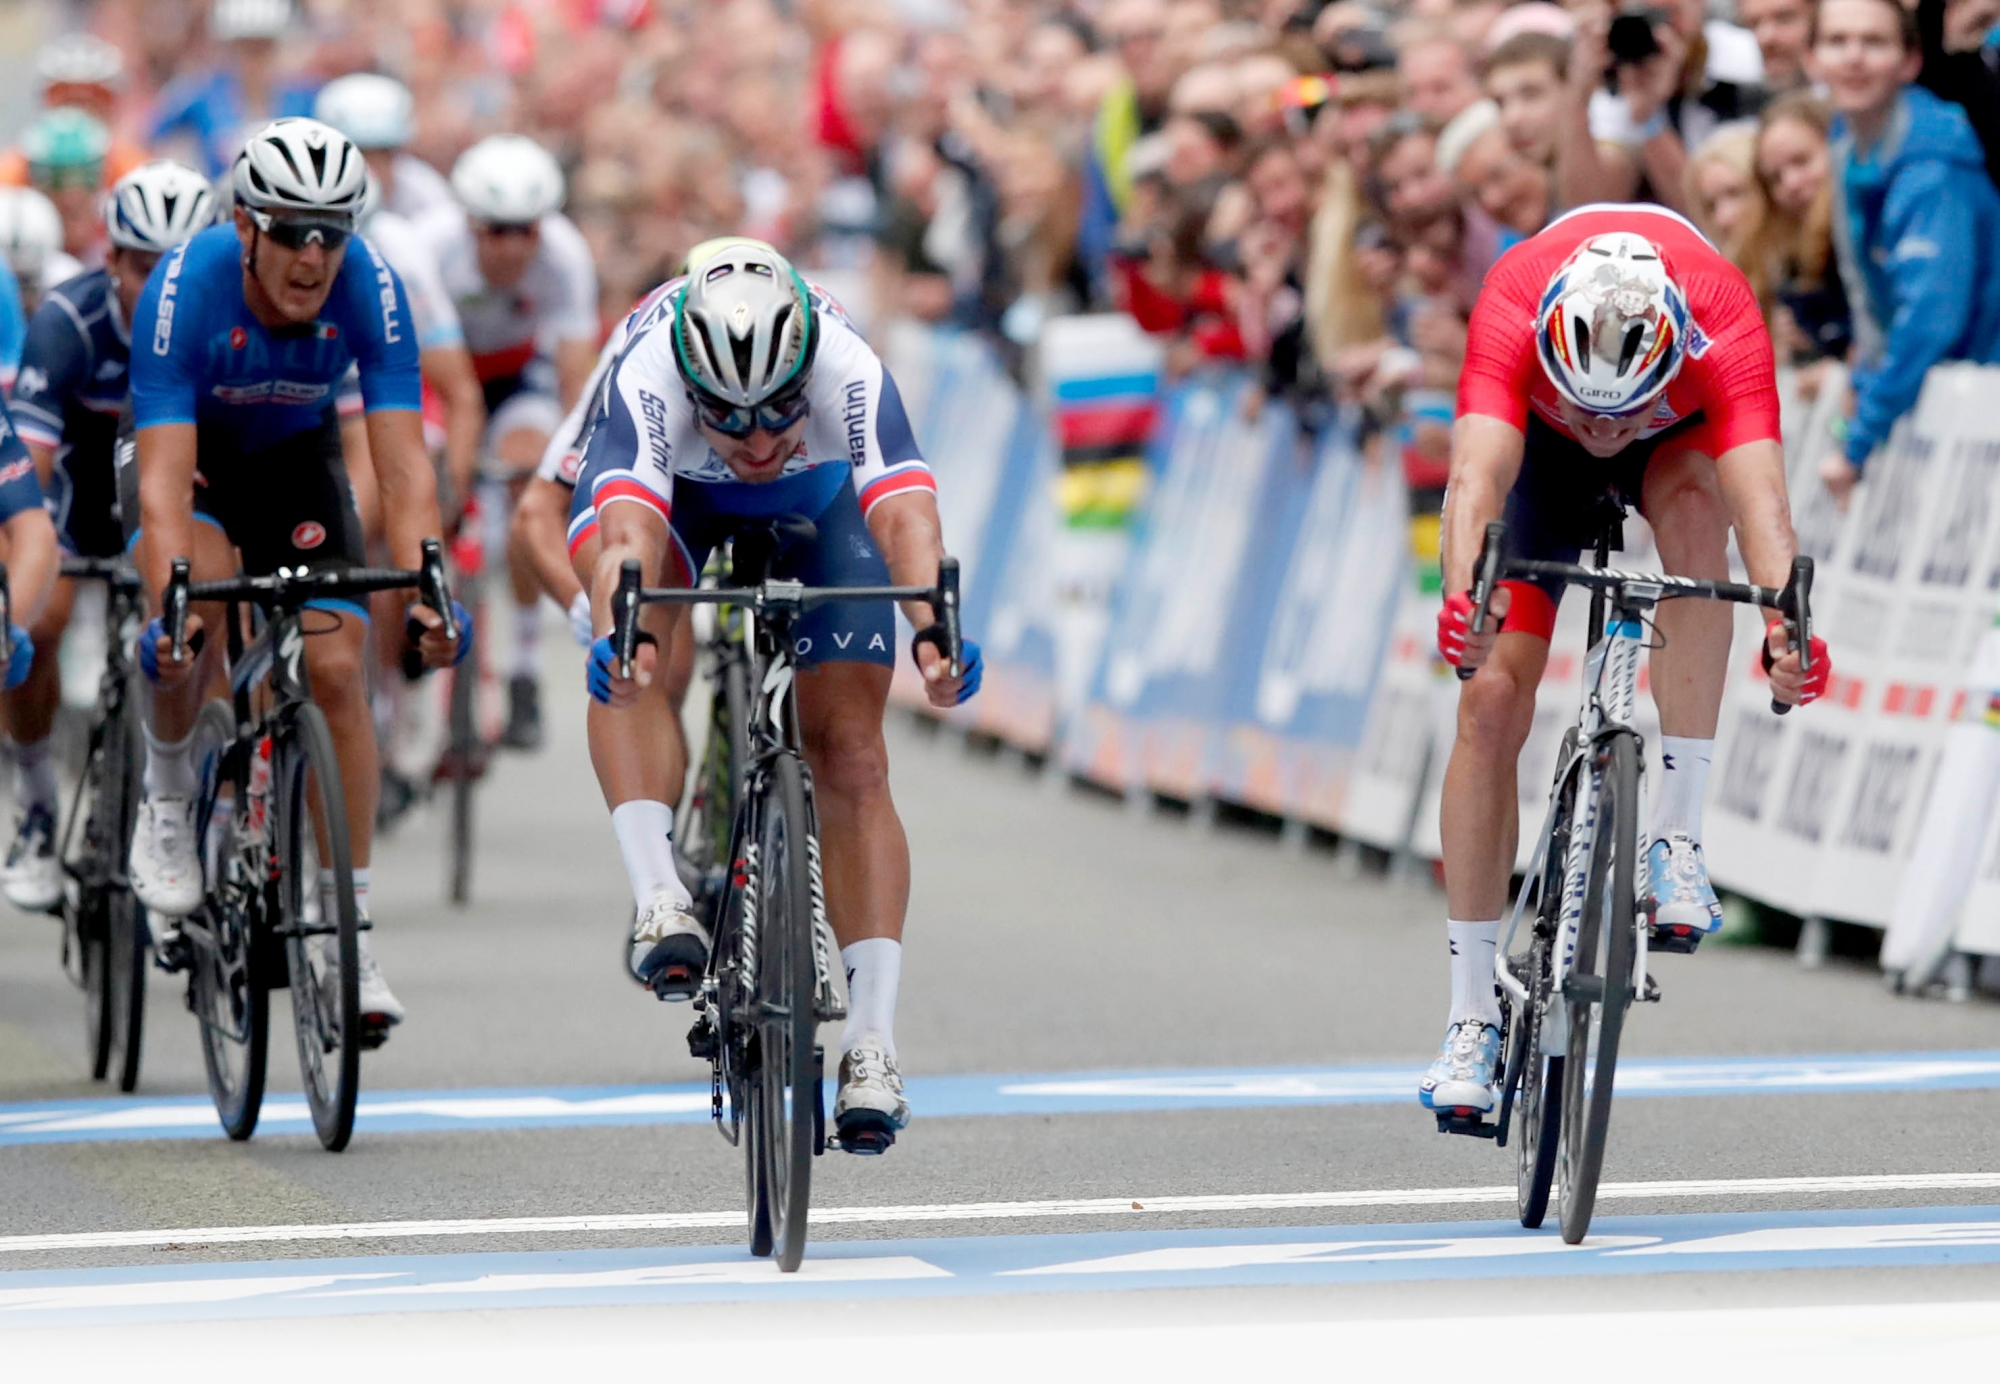 Peter Sagan of Slovakia, center, finishes in first place with Alexander Kristoff of Norway in second place in the Men's Elite Road Race at the UCI 2017 Road World Championship, in Bergen, Norway Sunday Sept. 24, 2017. (Cornelius Poppe/NTB Scanpix via AP) Norway UCI Road World Championships